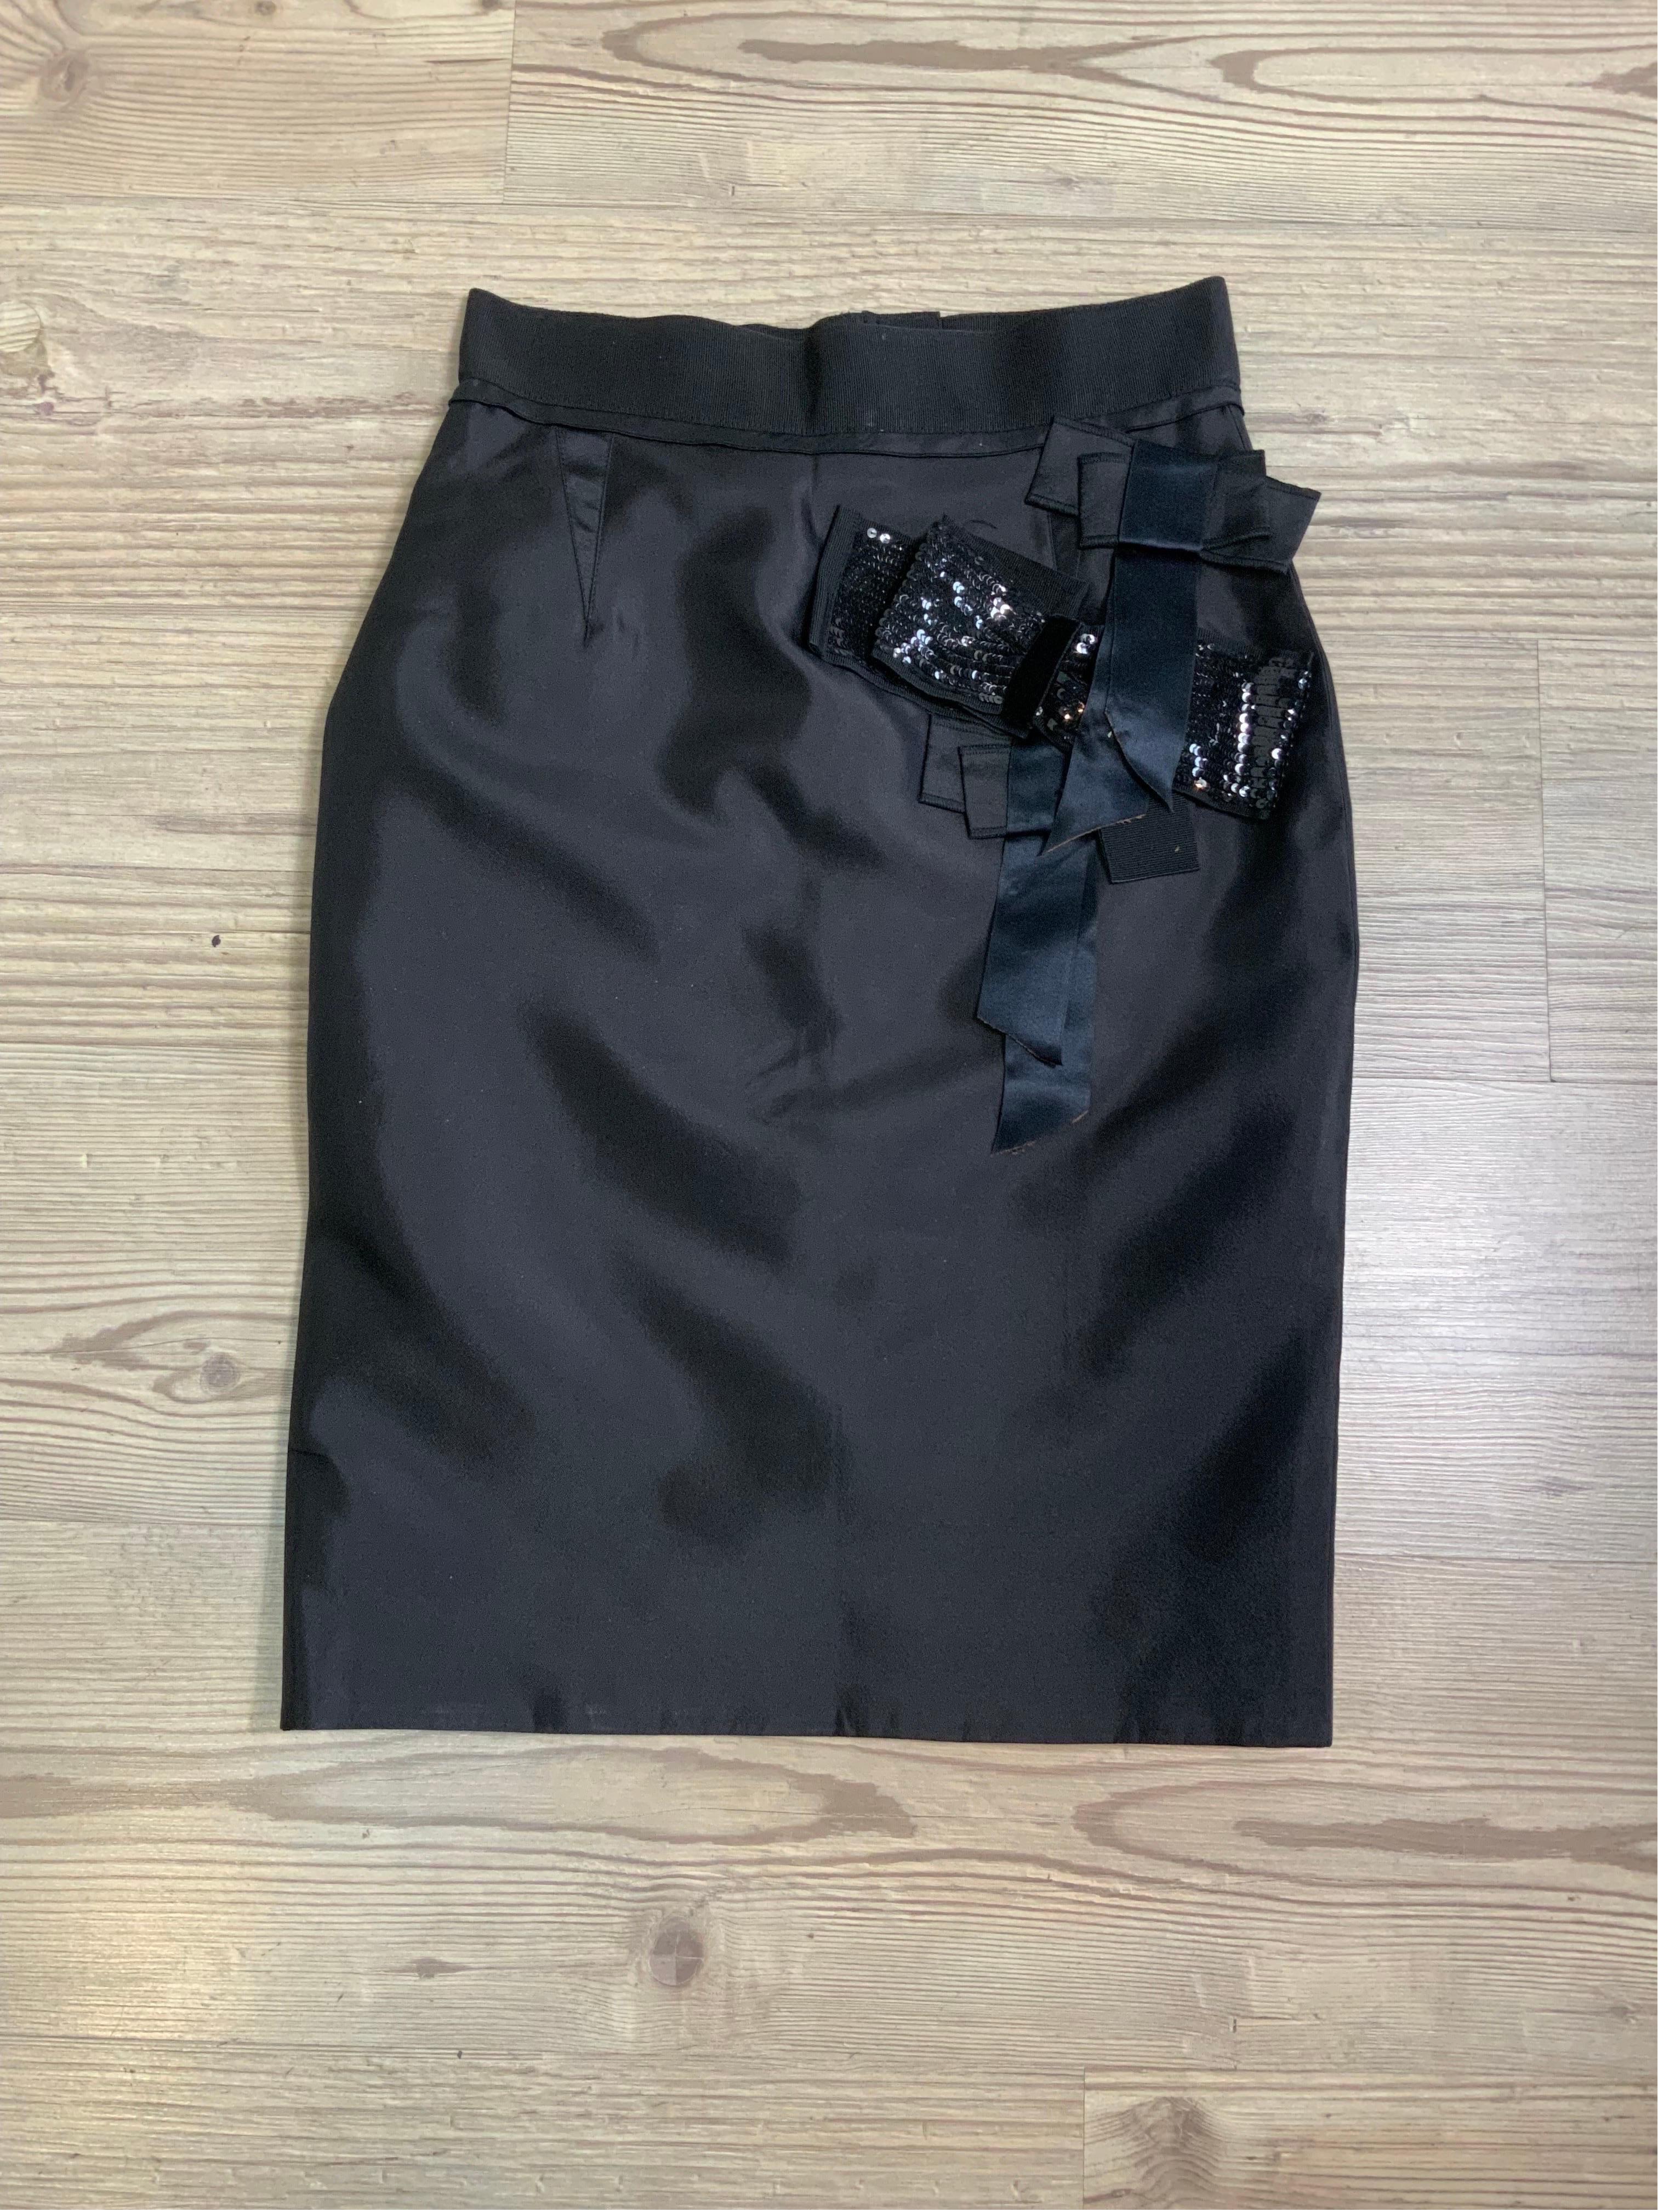 Dolce and Gabbana Black Skirt + jacket Suit For Sale 3